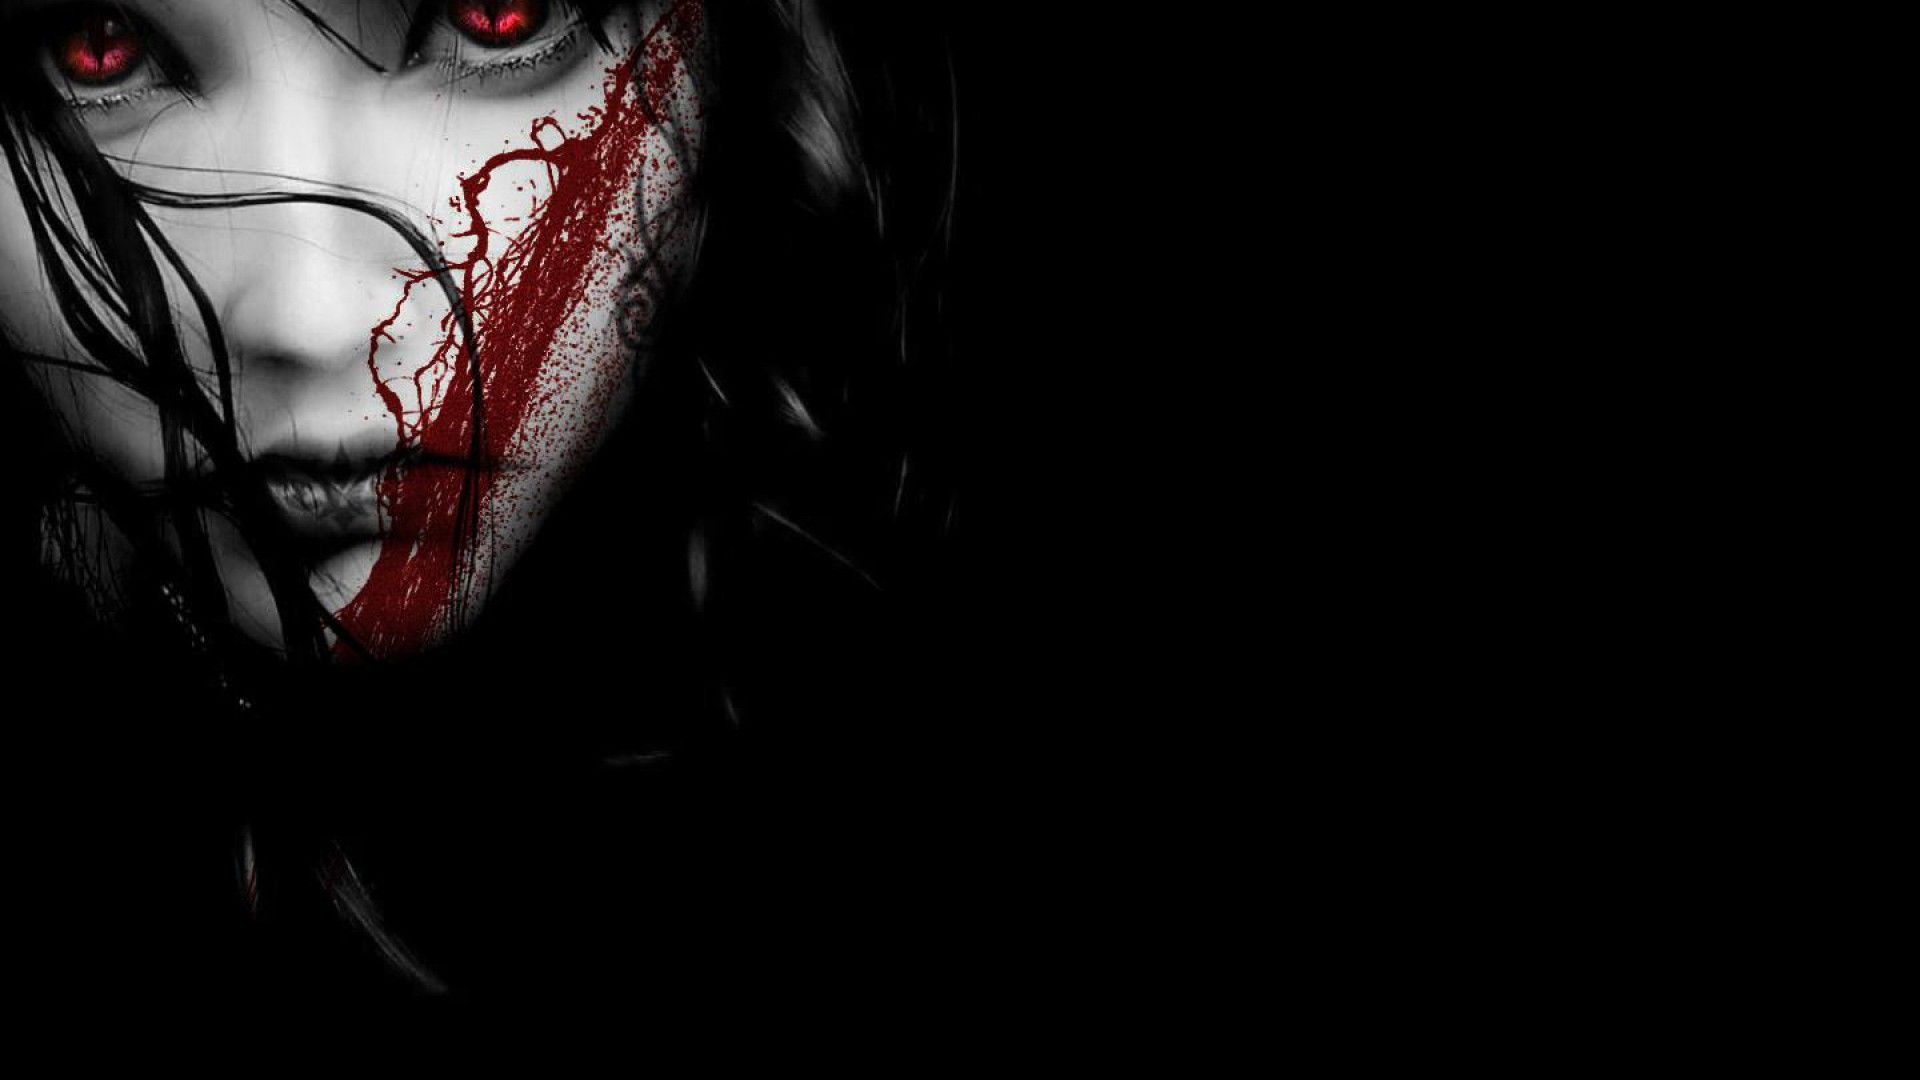 680+ Creepy HD Wallpapers and Backgrounds